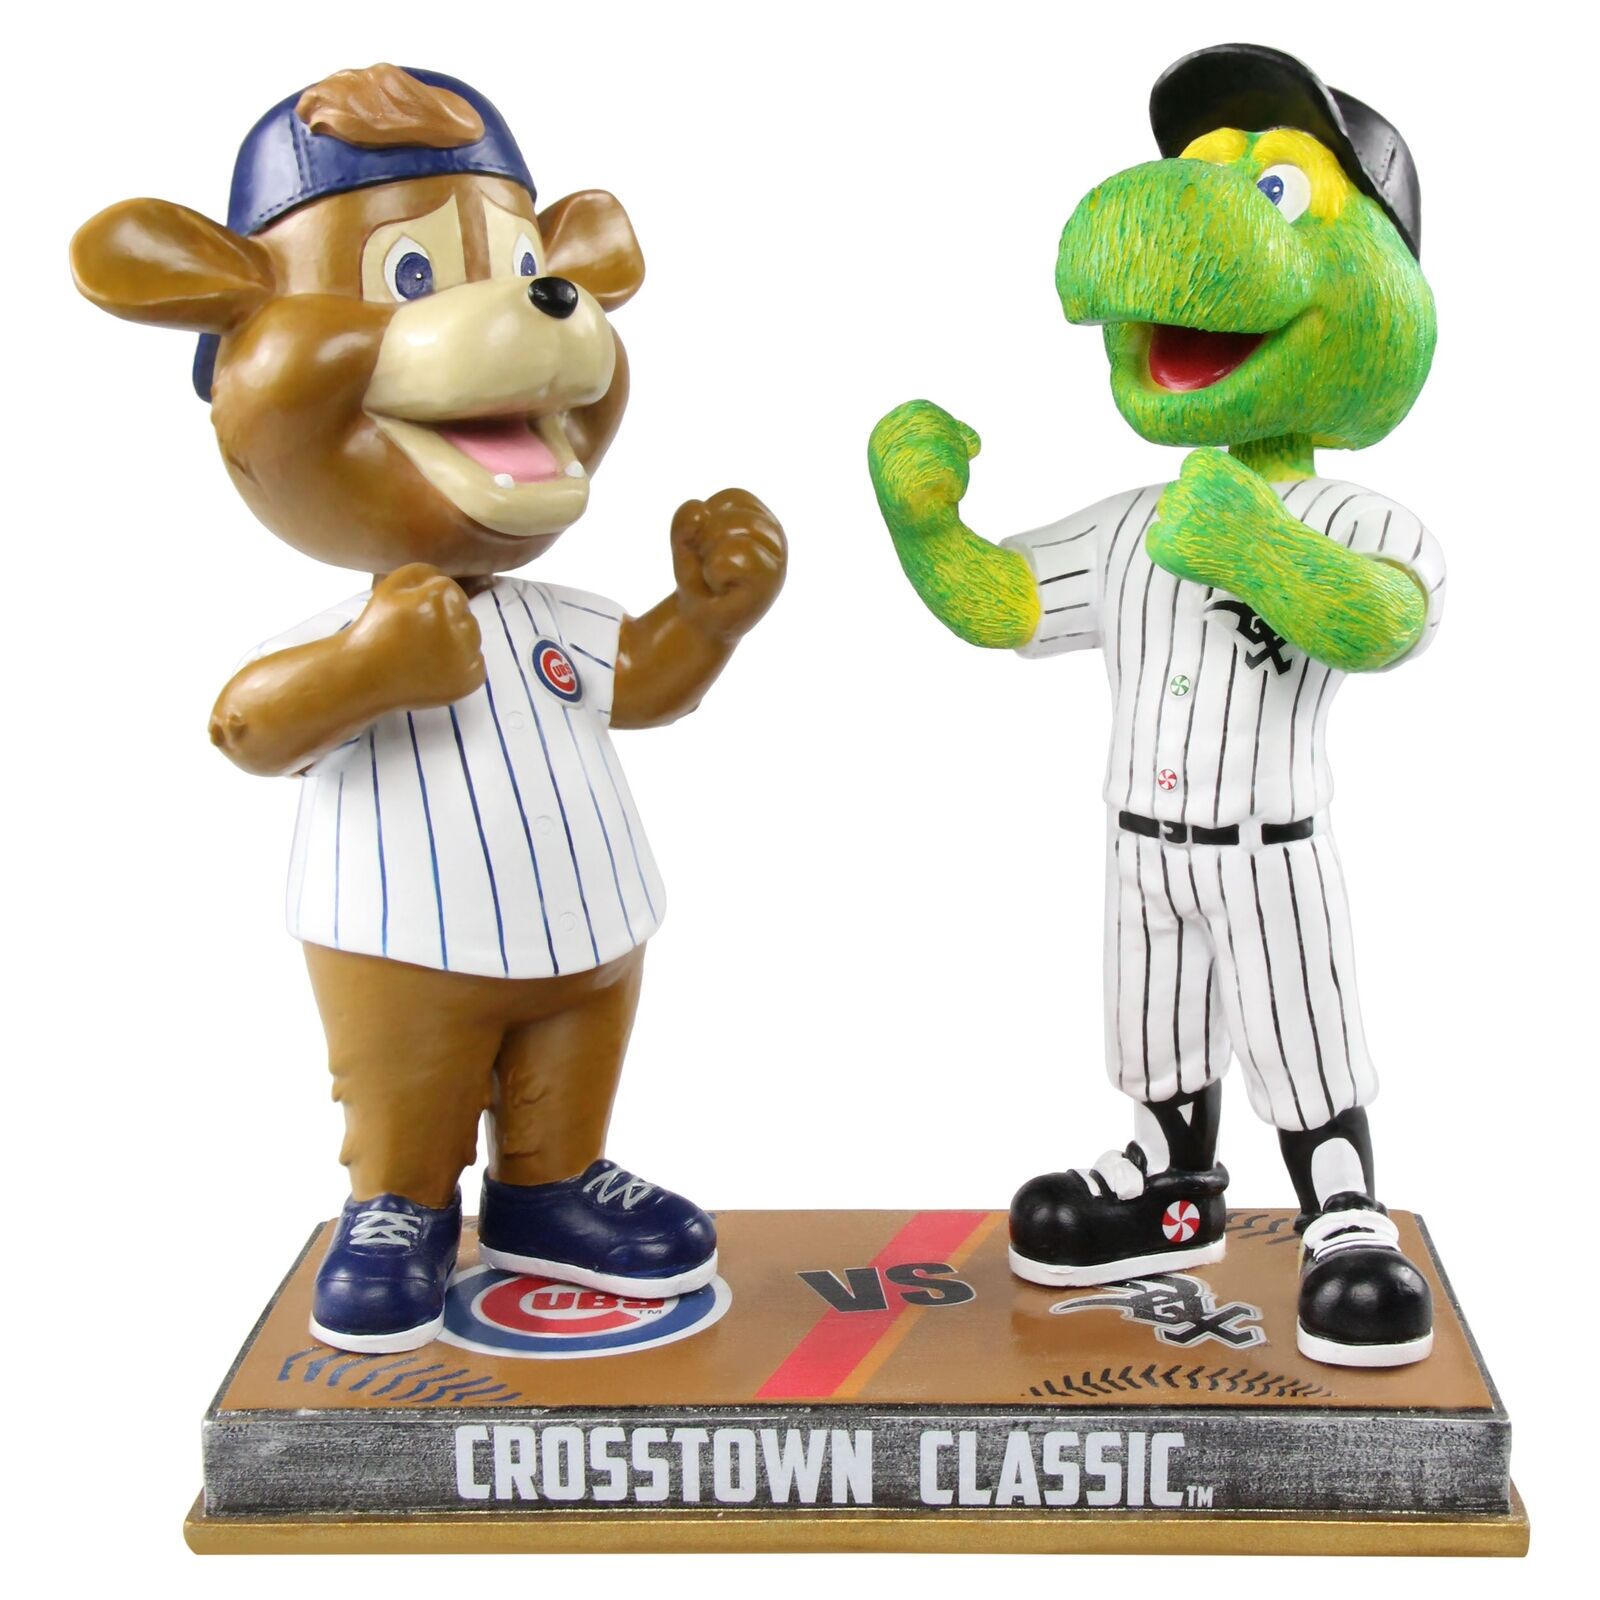 Chicago Cubs and Chicago White Sox - Clark and Southpaw Rivalry Bobblehead MLB